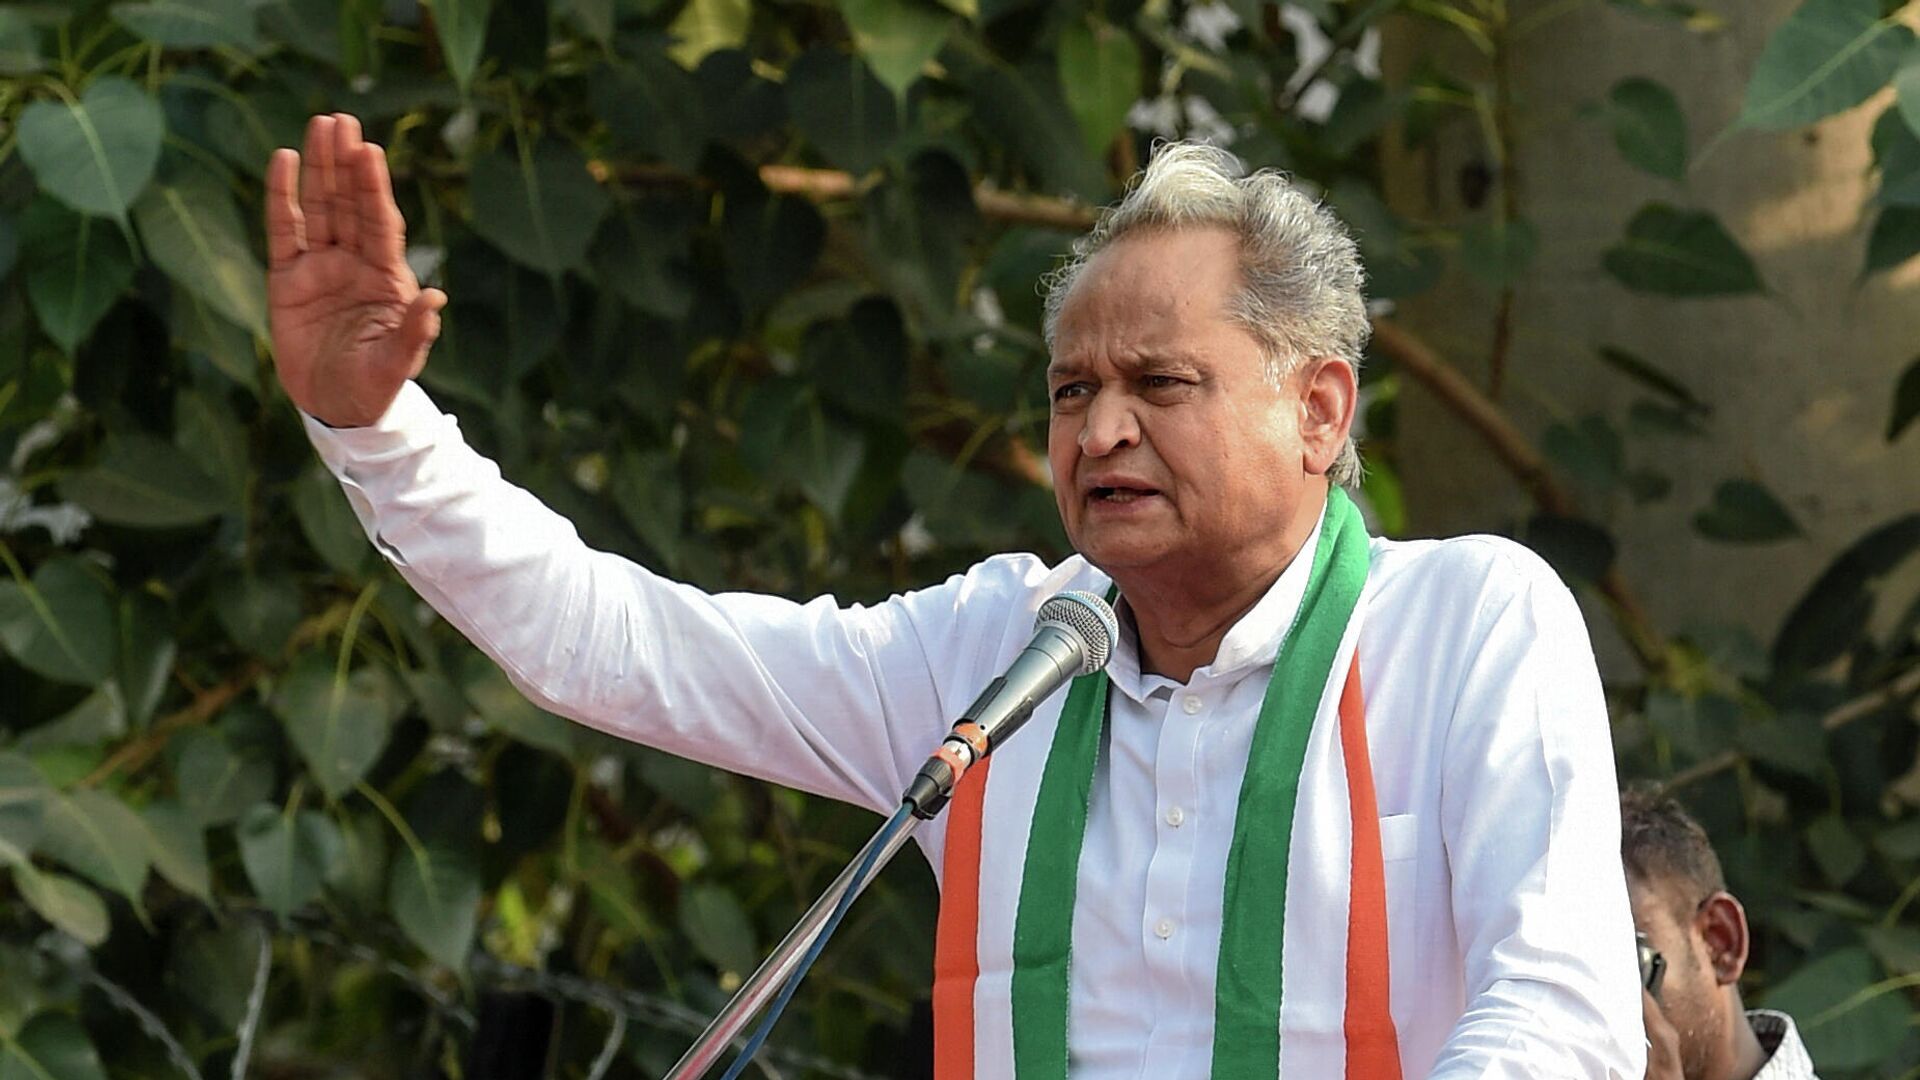 Rajasthan state's Chief Minister Ashok Gehlot gestures as he speaks during a 'Janvedna Yatra' (rally) against the price rise of onions and vegetables, in Ahmedabad on November 30, 2019 - Sputnik International, 1920, 04.03.2022